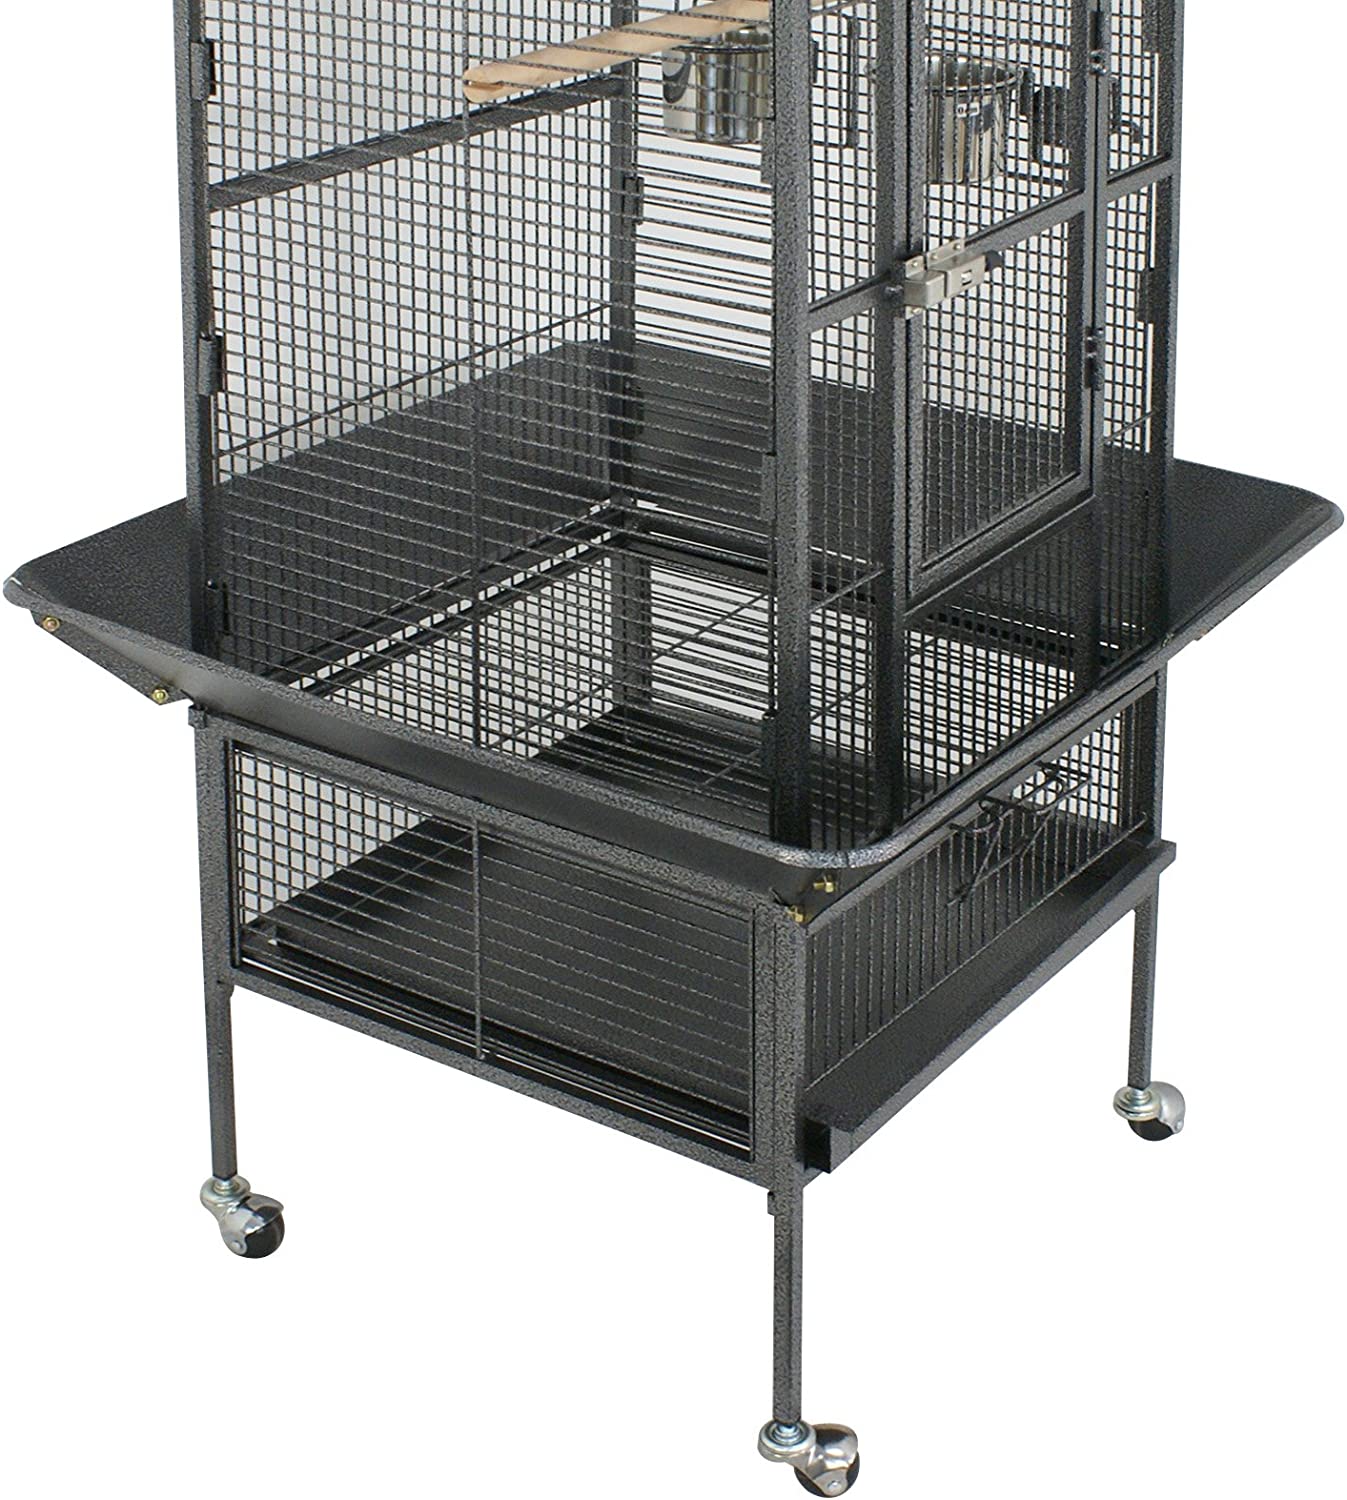 61-inch Playtop Parrot Bird Cage, Wrought Iron Birdcage with Rolling Stand for Medium Pet Bird Like Cockatiels Quaker Conure Parakeet Lovebird Finch, Black